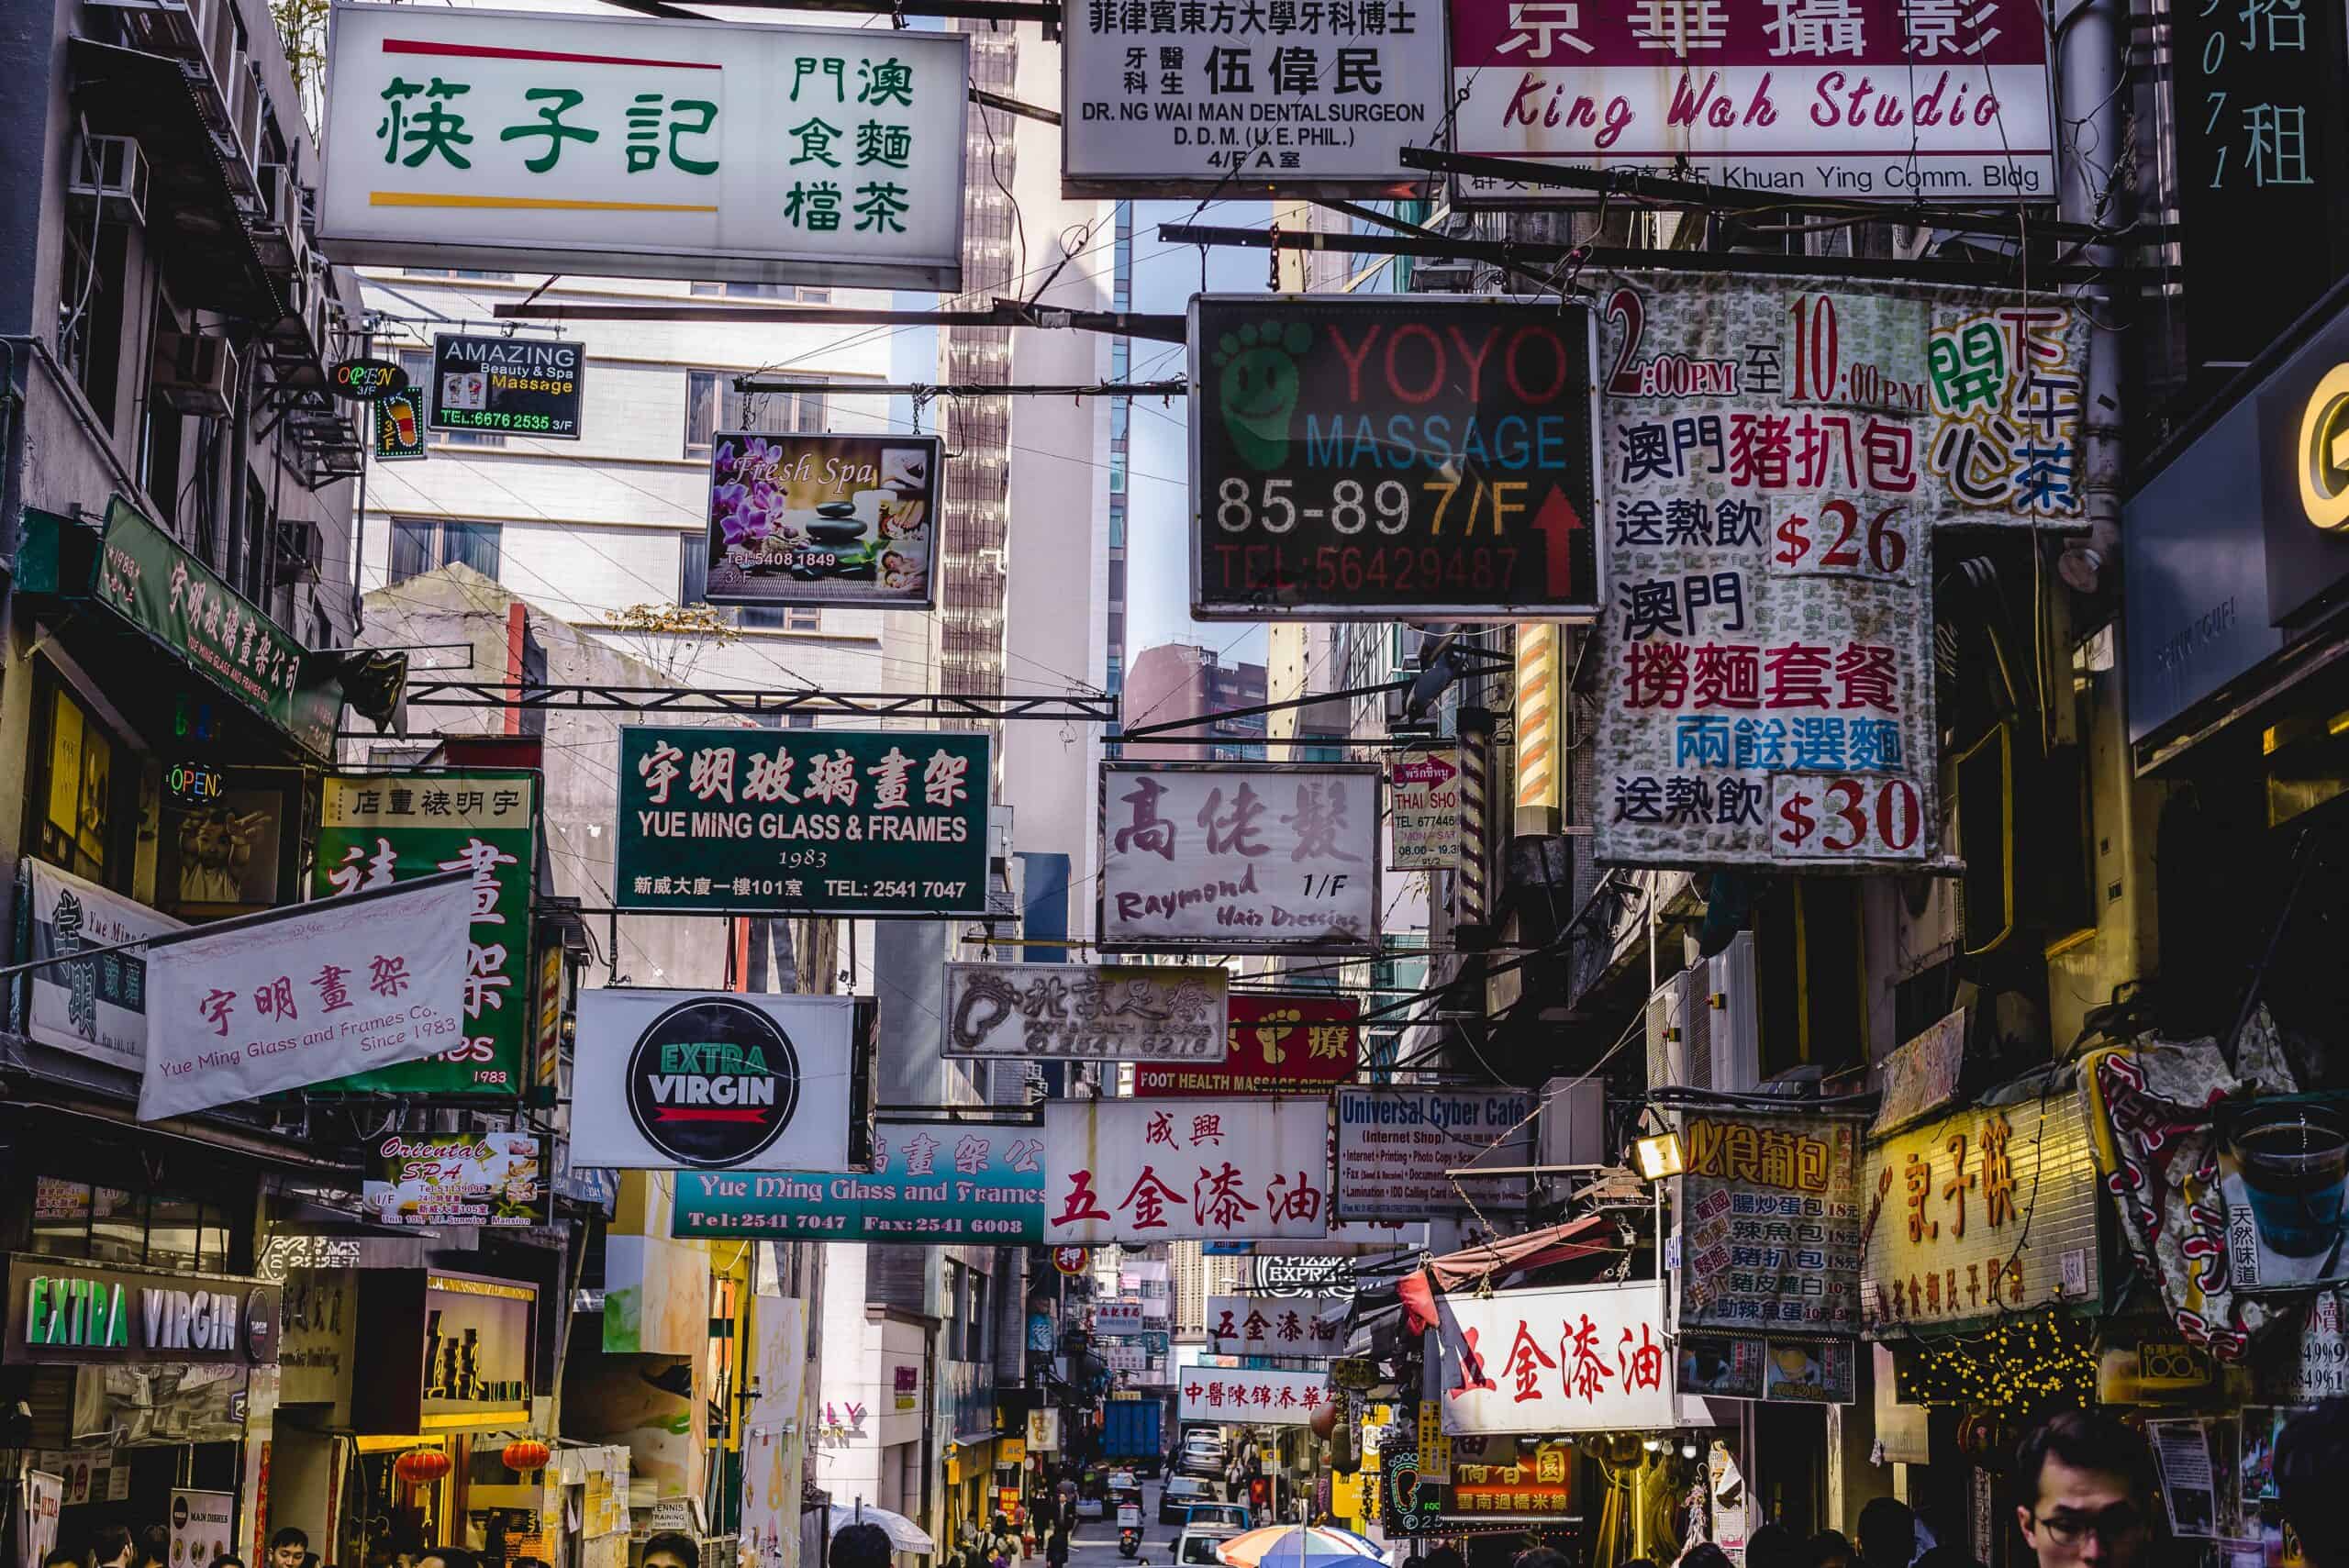 A Guide To Hong Kong’s Taxation System